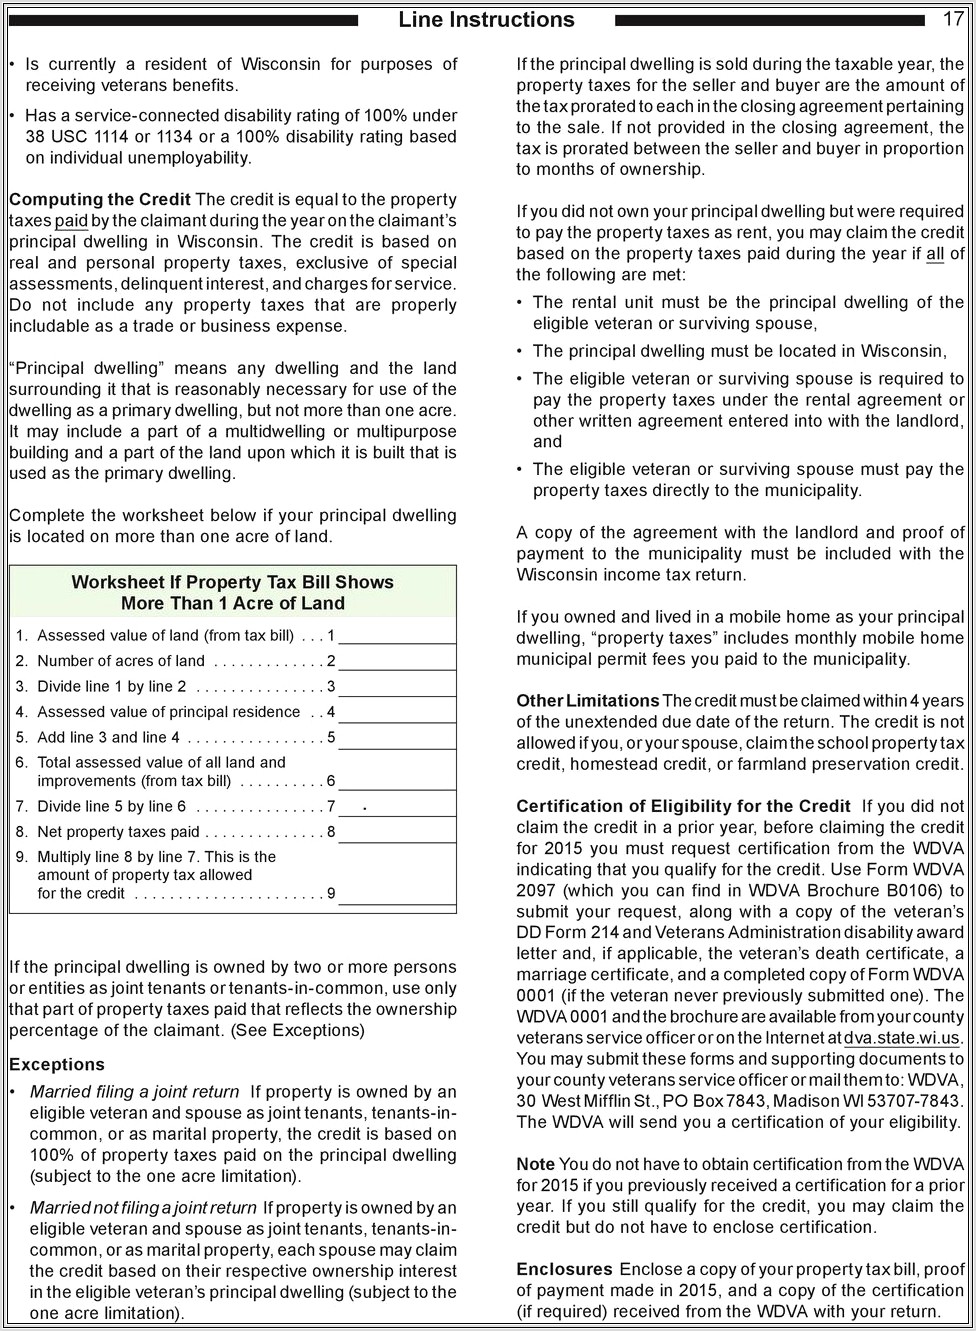 2015 Estimated Income Tax Worksheet Wisconsin